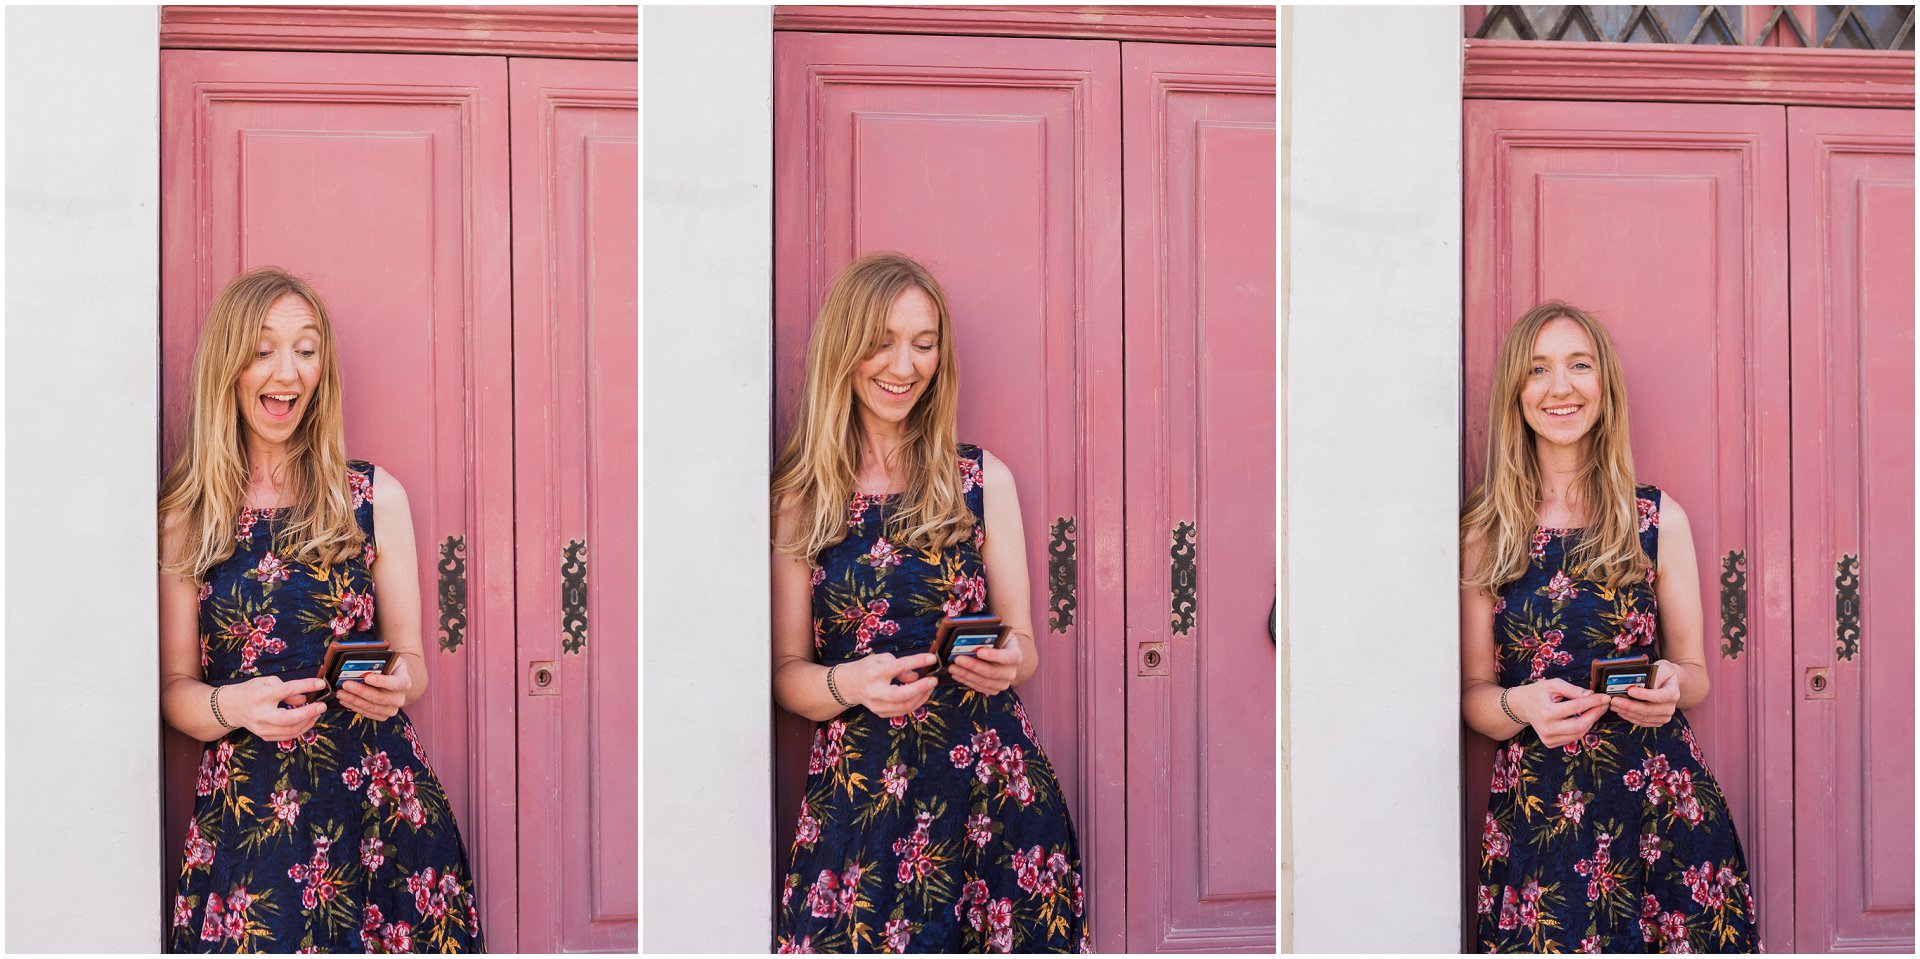 Mdina destination brand photography, Malta pink door, Laura from Tell My Story, image by London brand photographer and destination brand photographer AKP Branding Stories